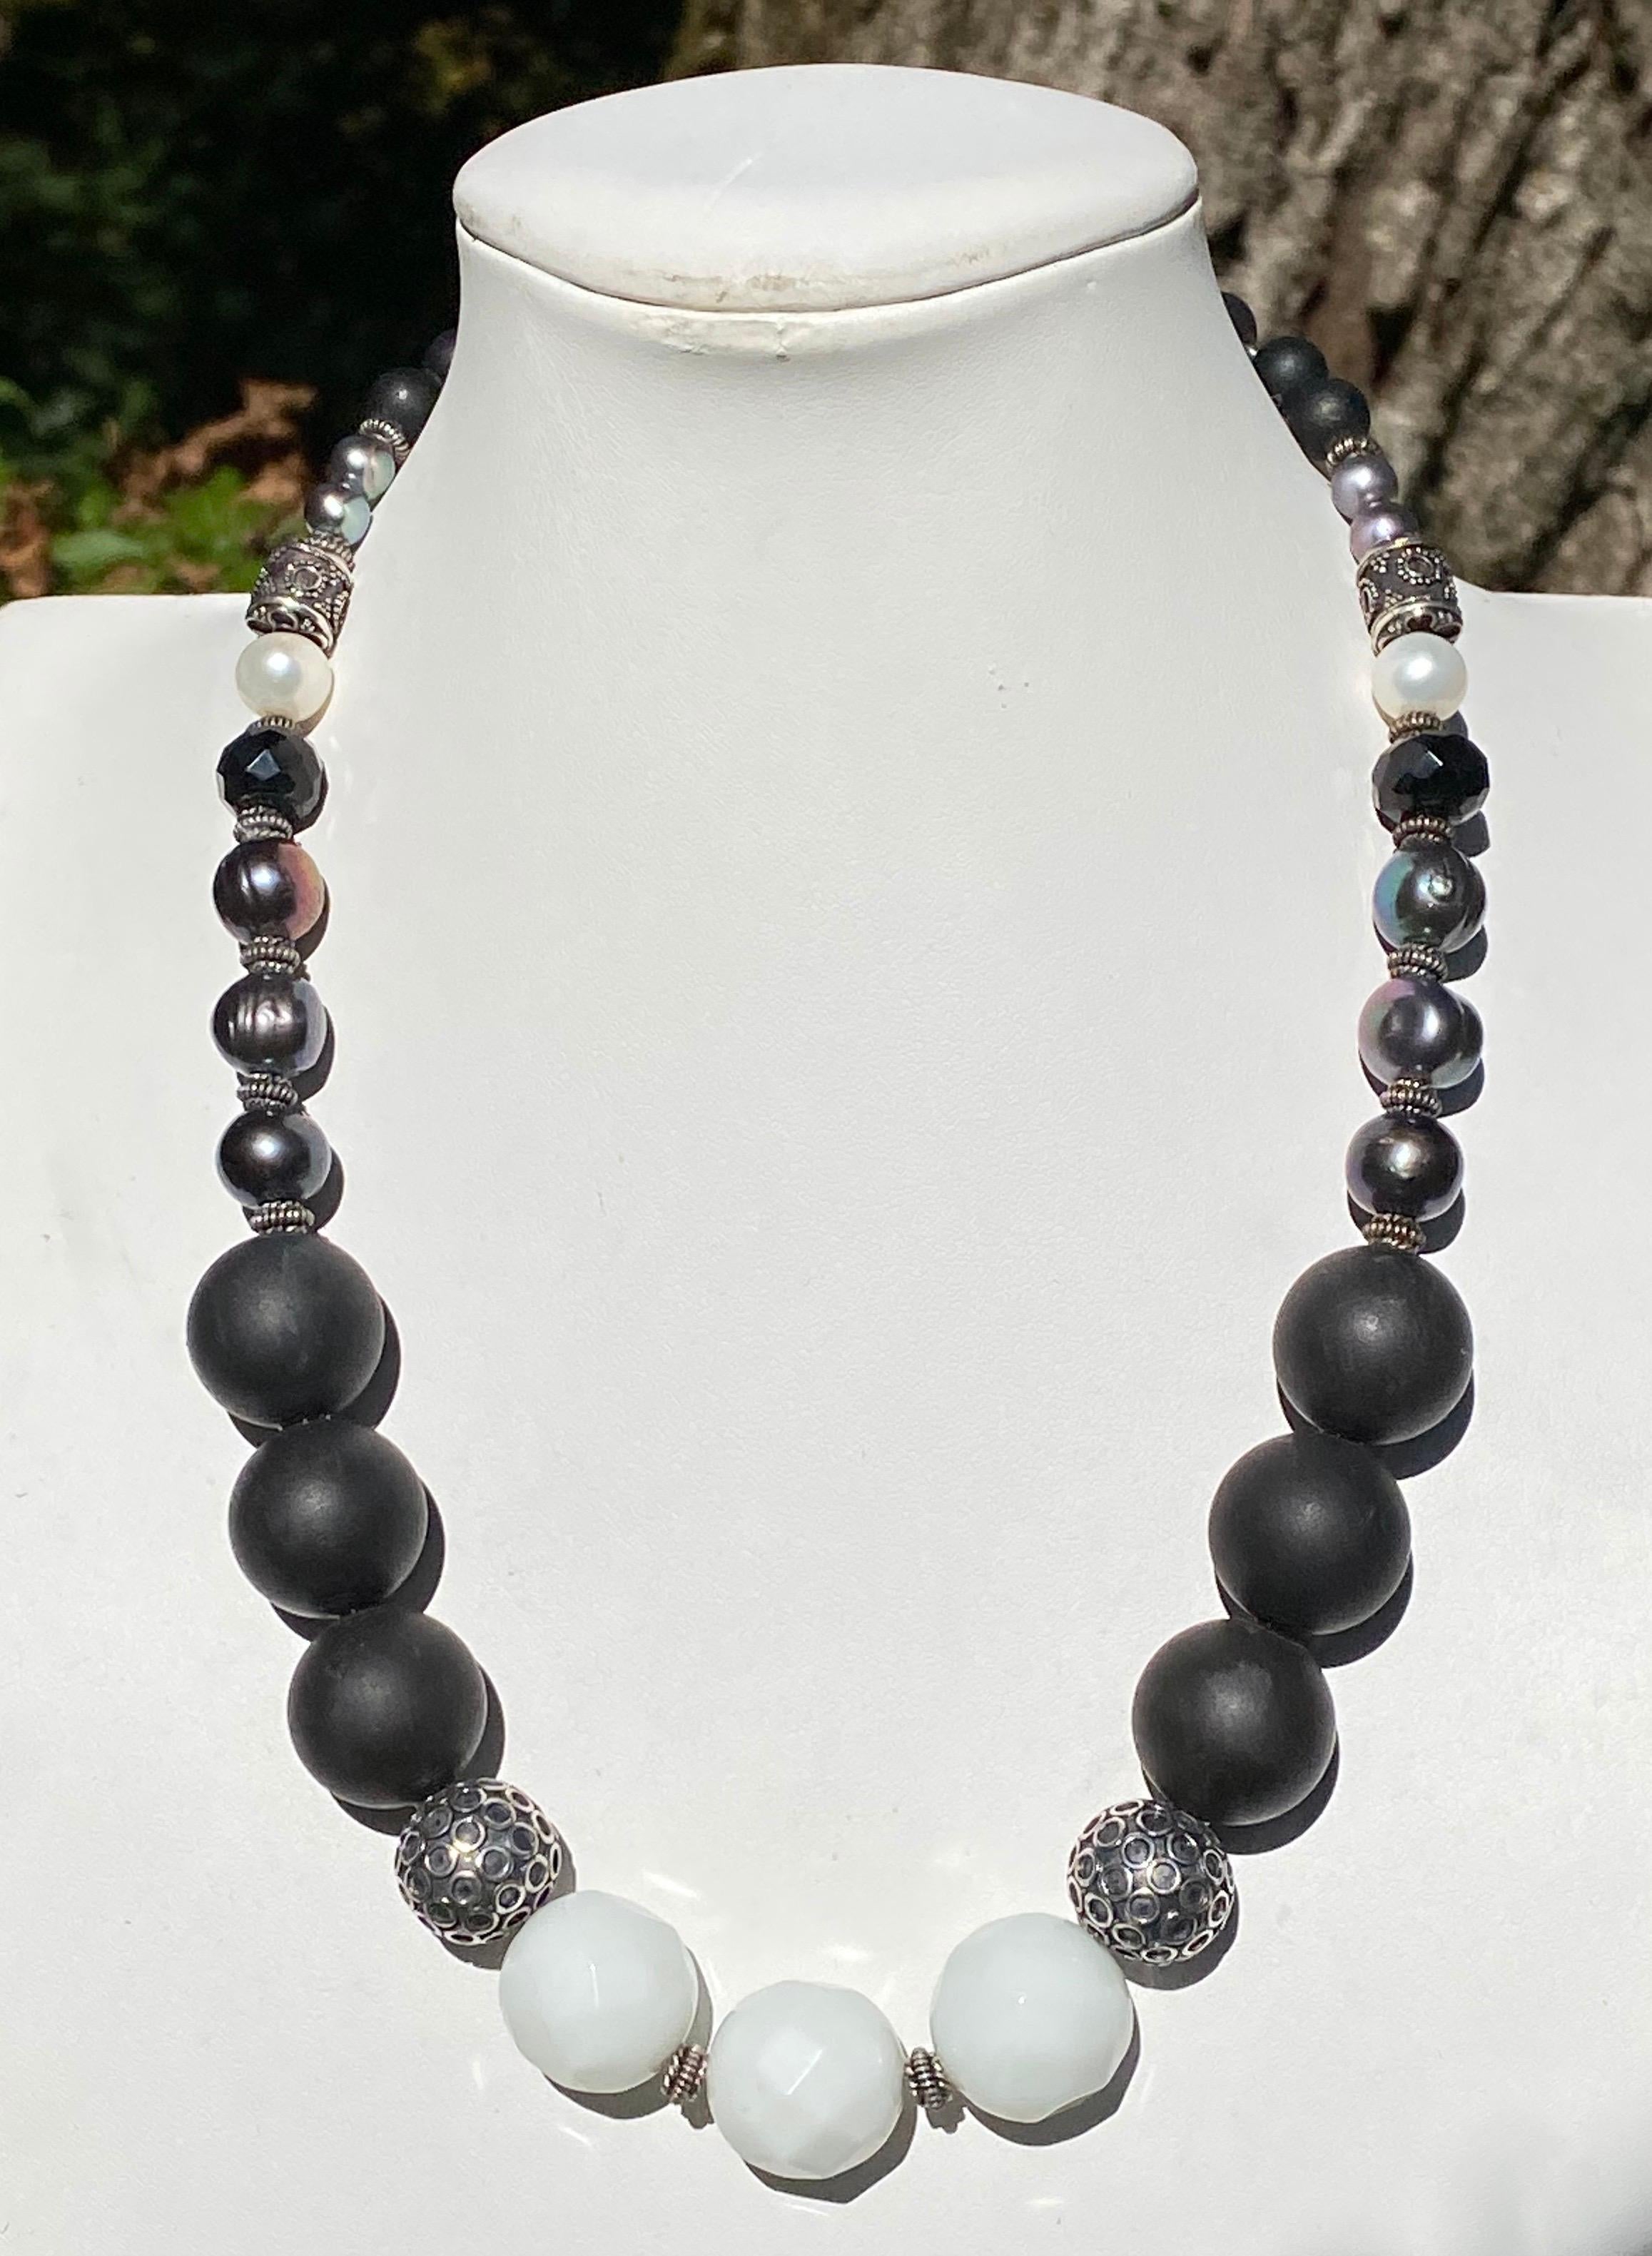 Funky Indian inspired necklace with large faceted White Agate Beads, Large Black Onyx Beads, Freshwater Dyed Black Pearls, and 2 White Freshwater Cultured Pearls with Sterling Silver Rondelles and decorative round and barrel spacers, all with a